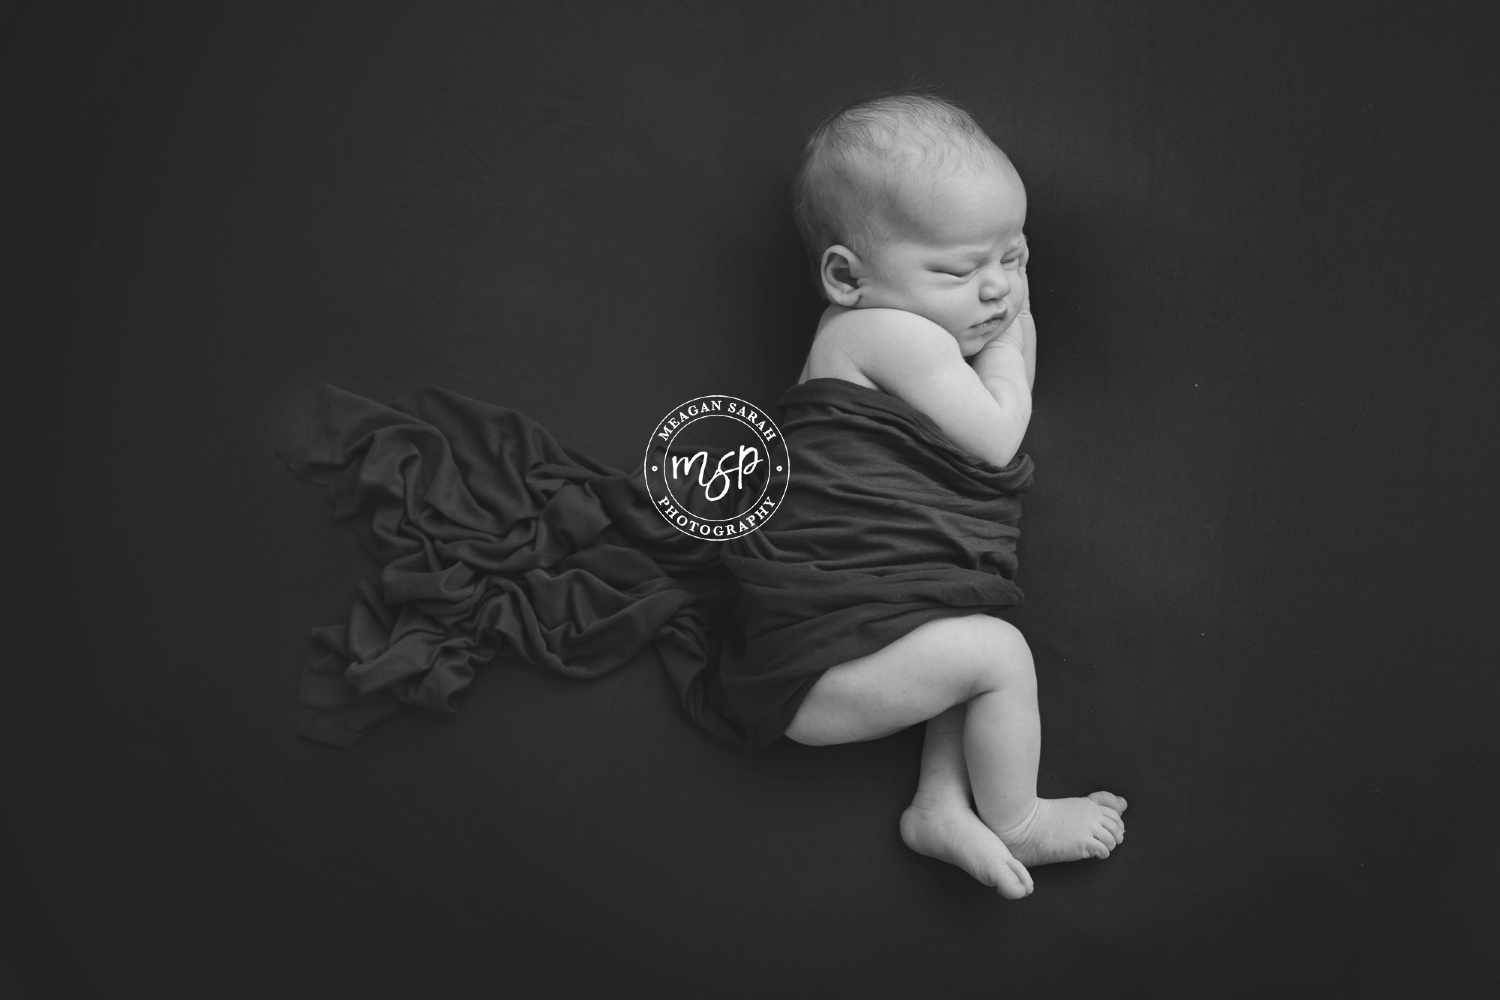 Black and White,PHOTOGRAPHER,Katie Louise Williams,Meagan Sarah Pope,West Yorkshire Photographer,Professional Photographer in Leeds,Meagan Sarah Photography,Leeds Photographer,Horsforth Photographer,Horsforth Leeds Photographer,Sex of Baby,Girl,Horsforth Newborn Photography,Leeds Baby Photographer,Leeds Newborn Photographer,Newborn Babies,Newborn Photographer,Newborn Photography,Photos of Babies,Photos of Newborns,Yorkshire Newborn Photographer,Yorkshire Newborn Photography,